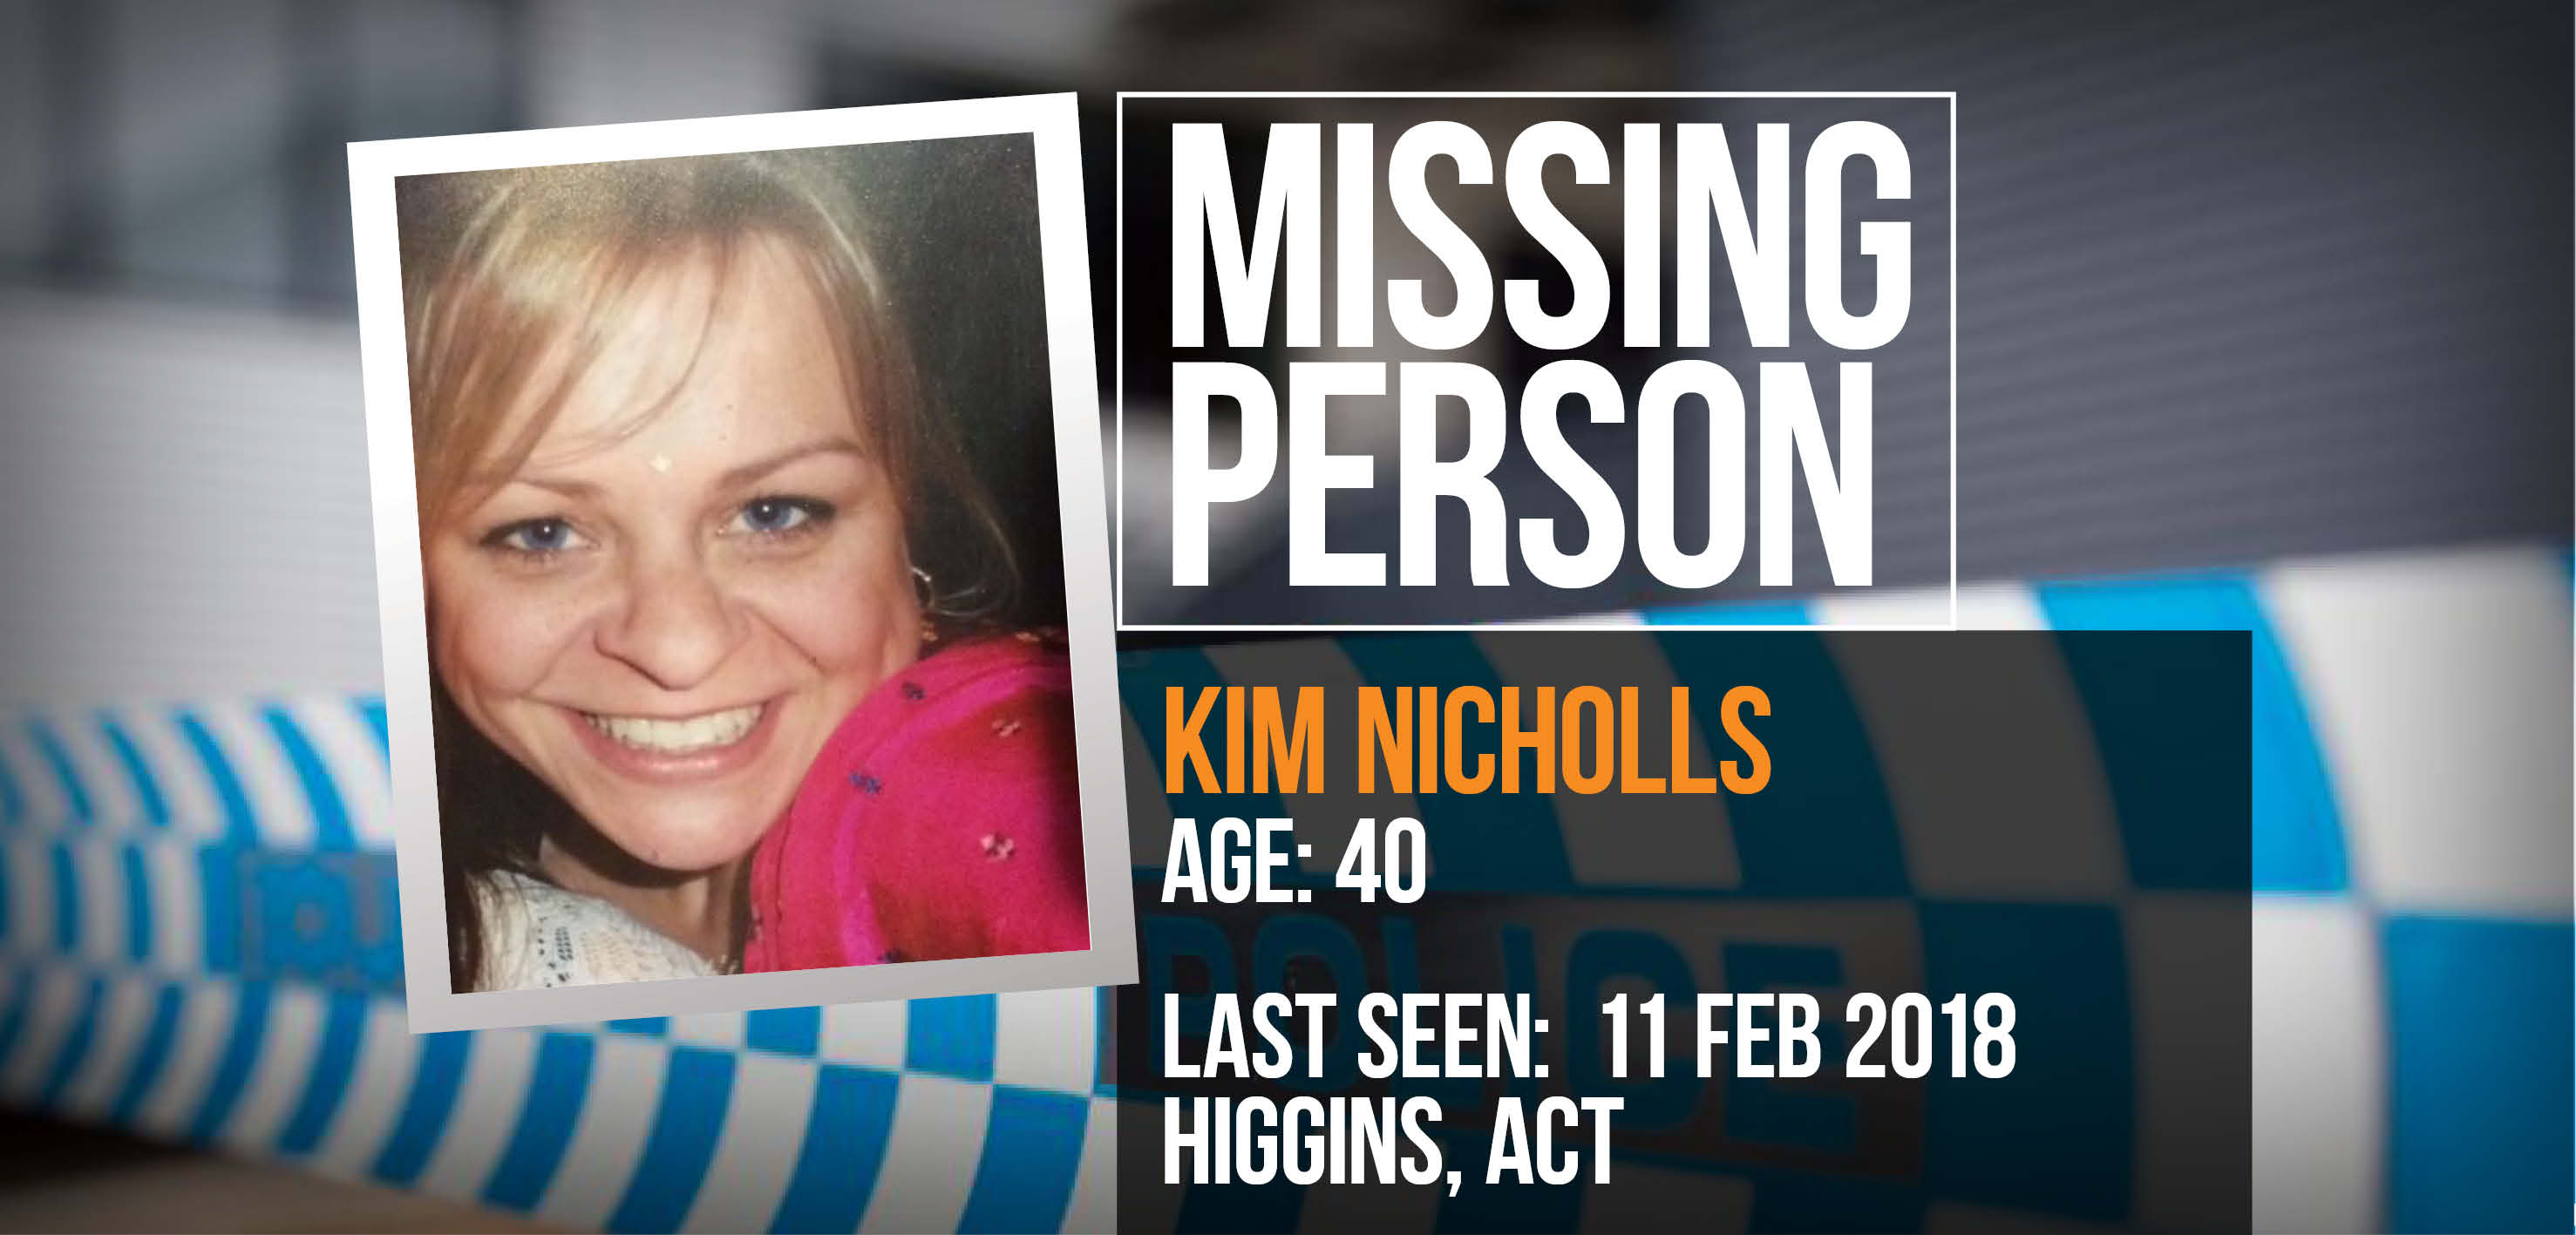 Police Seek Assistance In Locating Missing Person Kim Nicholls Act